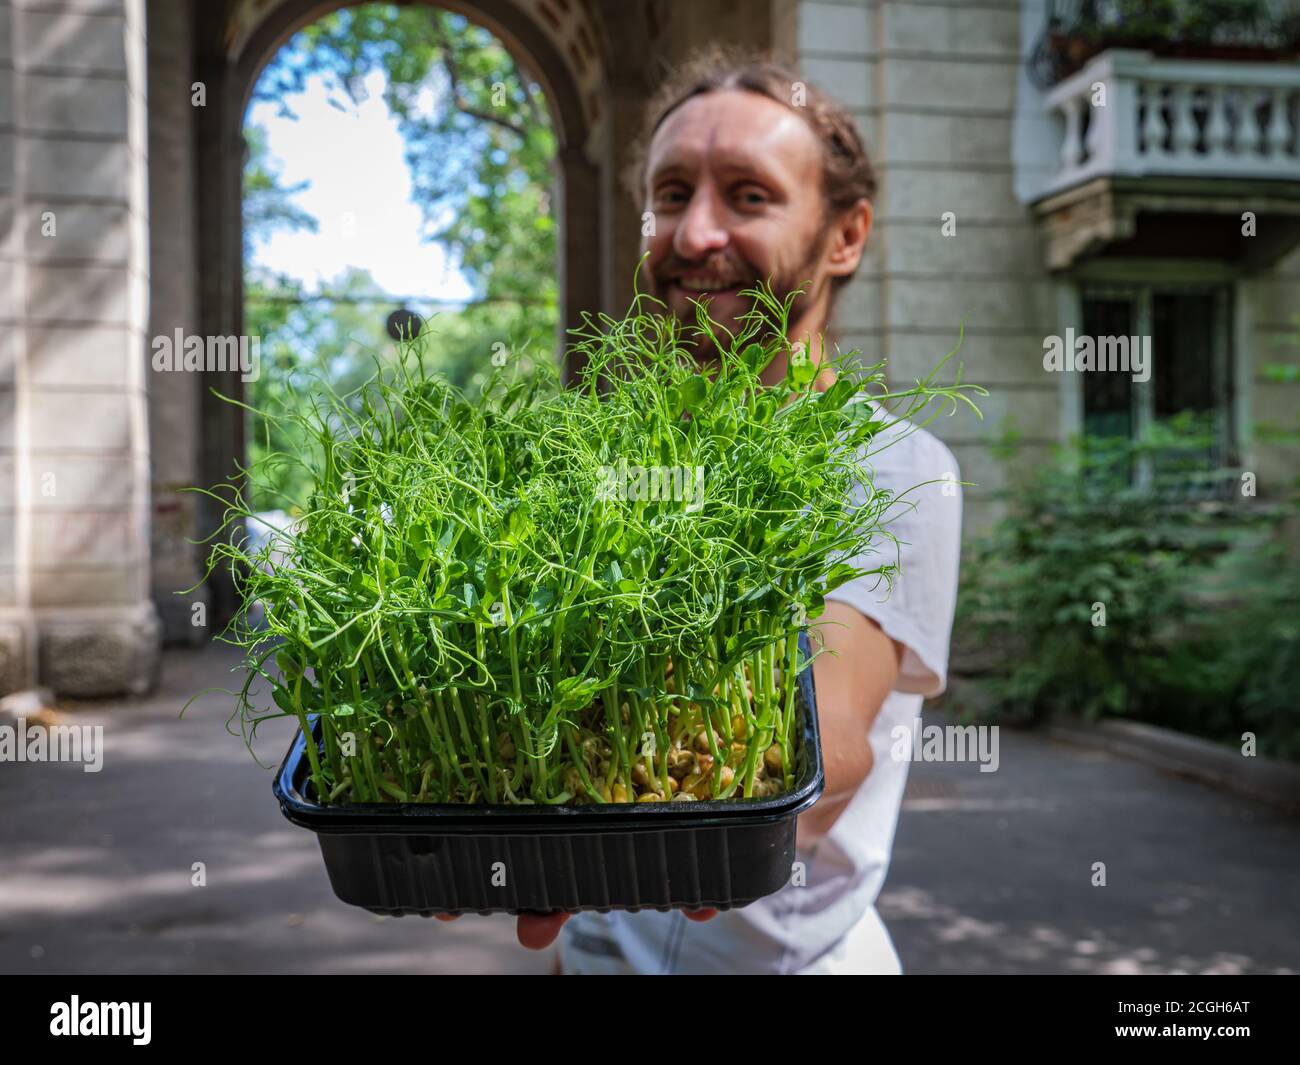 The guy offers microgreens. Cheerful guy pushes a container with fresh microgreens of pea sprouts Stock Photo